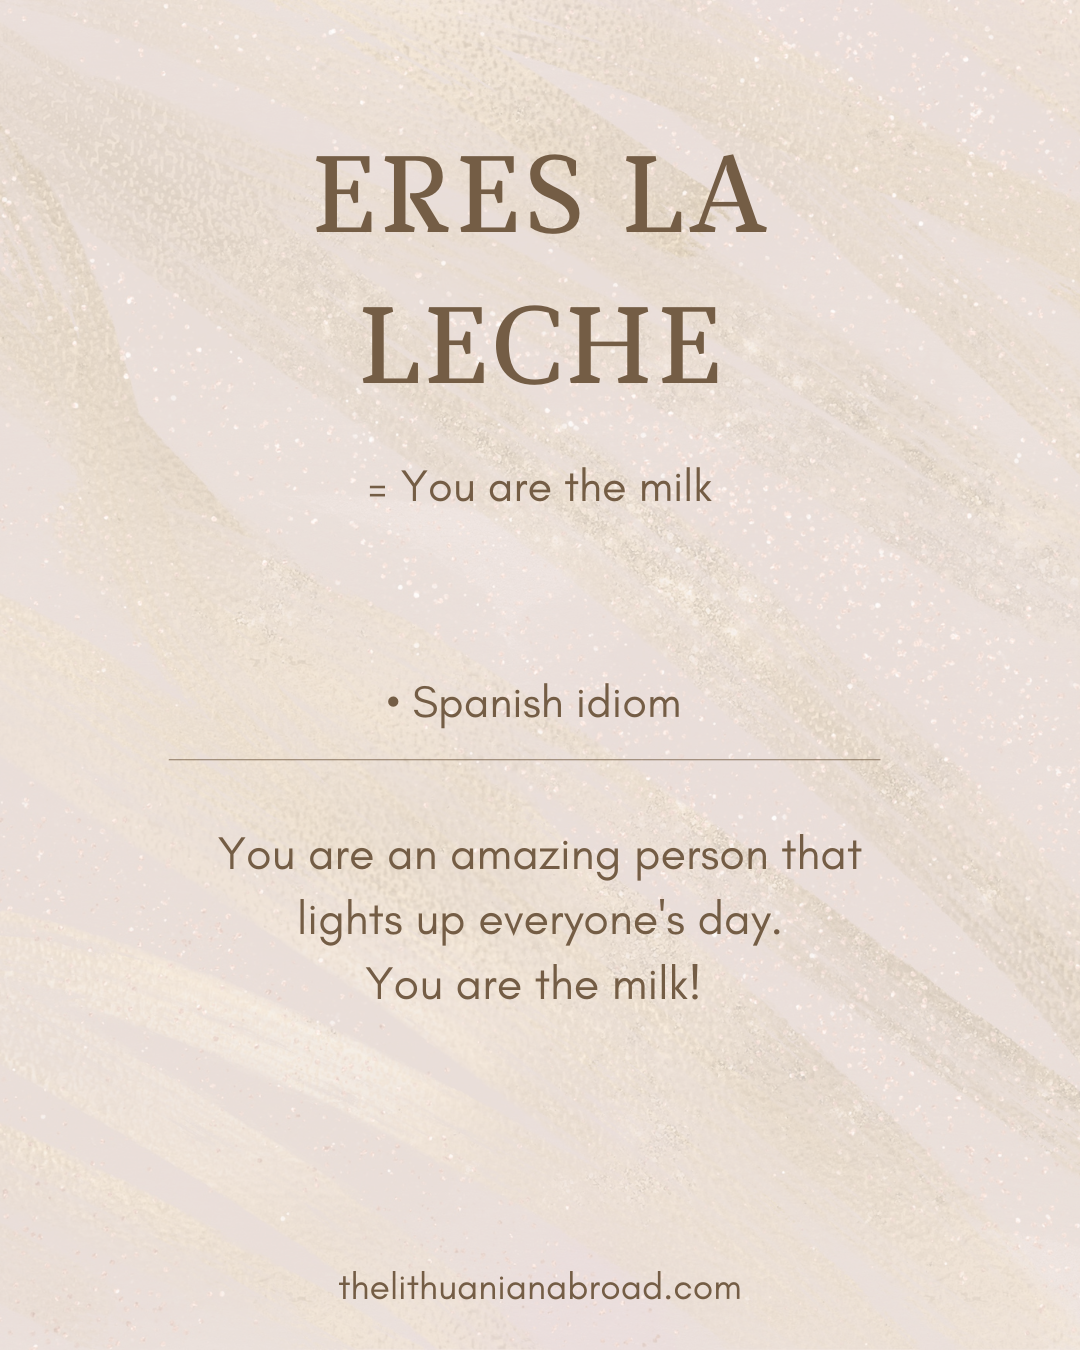 spanish sayings and quotes